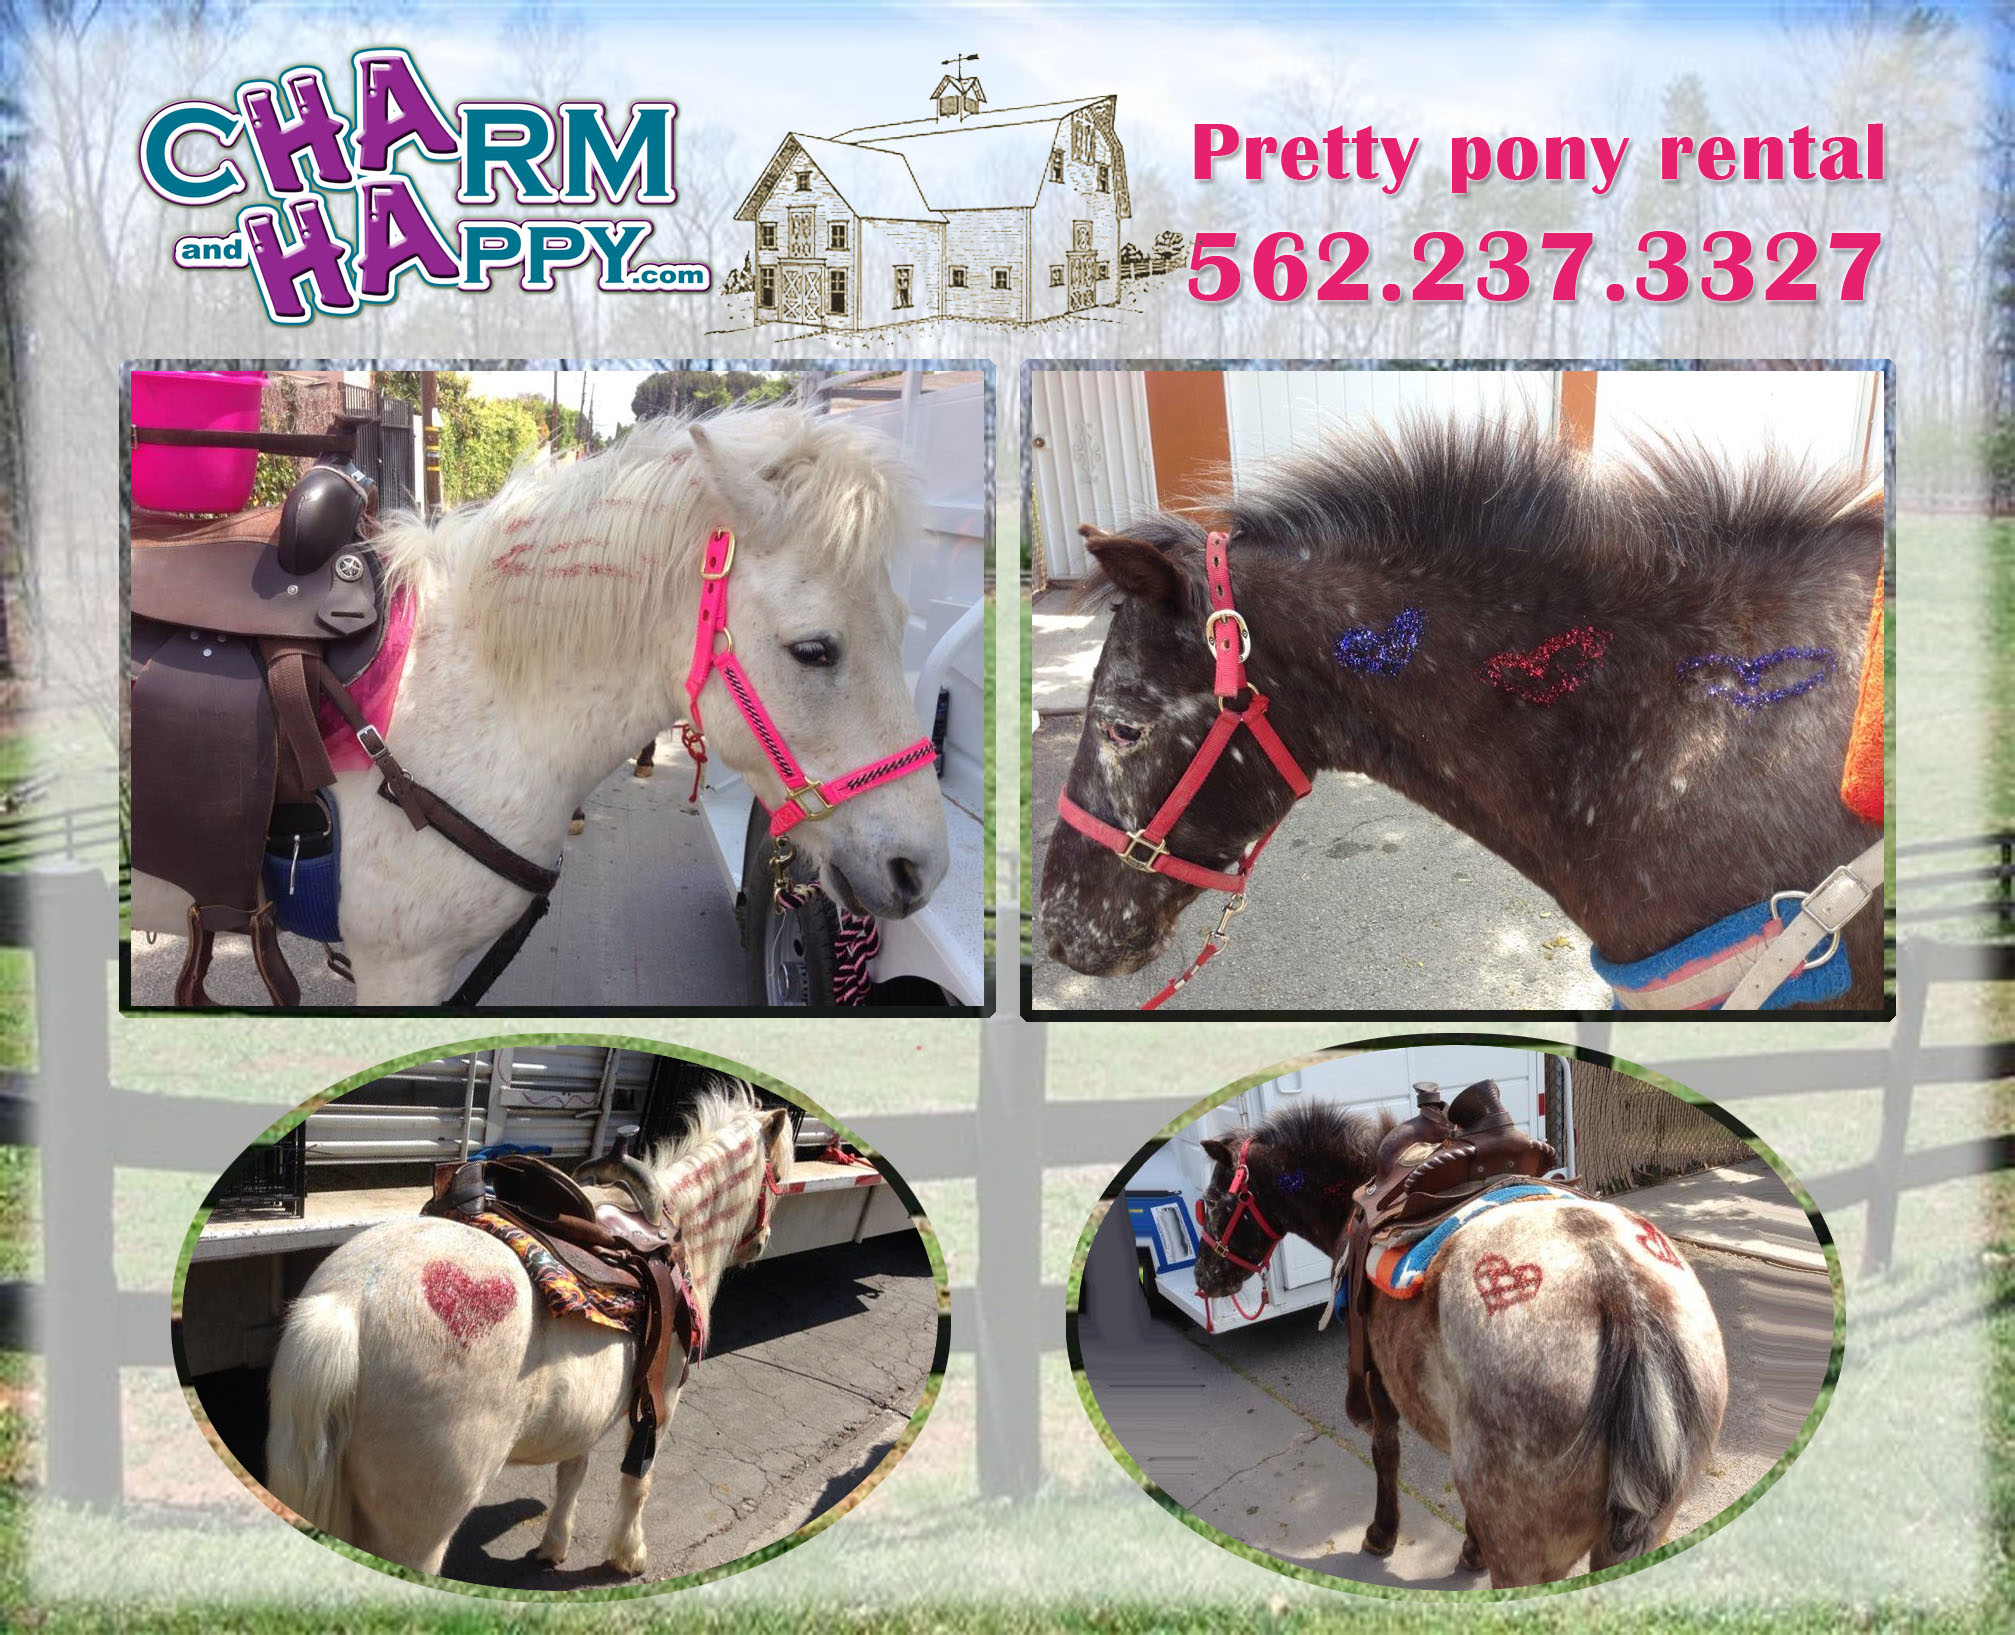 pony rides petting zoo rental los angeles whittier socal charmandhappy carmen tellez year of the horse 2014 party rental